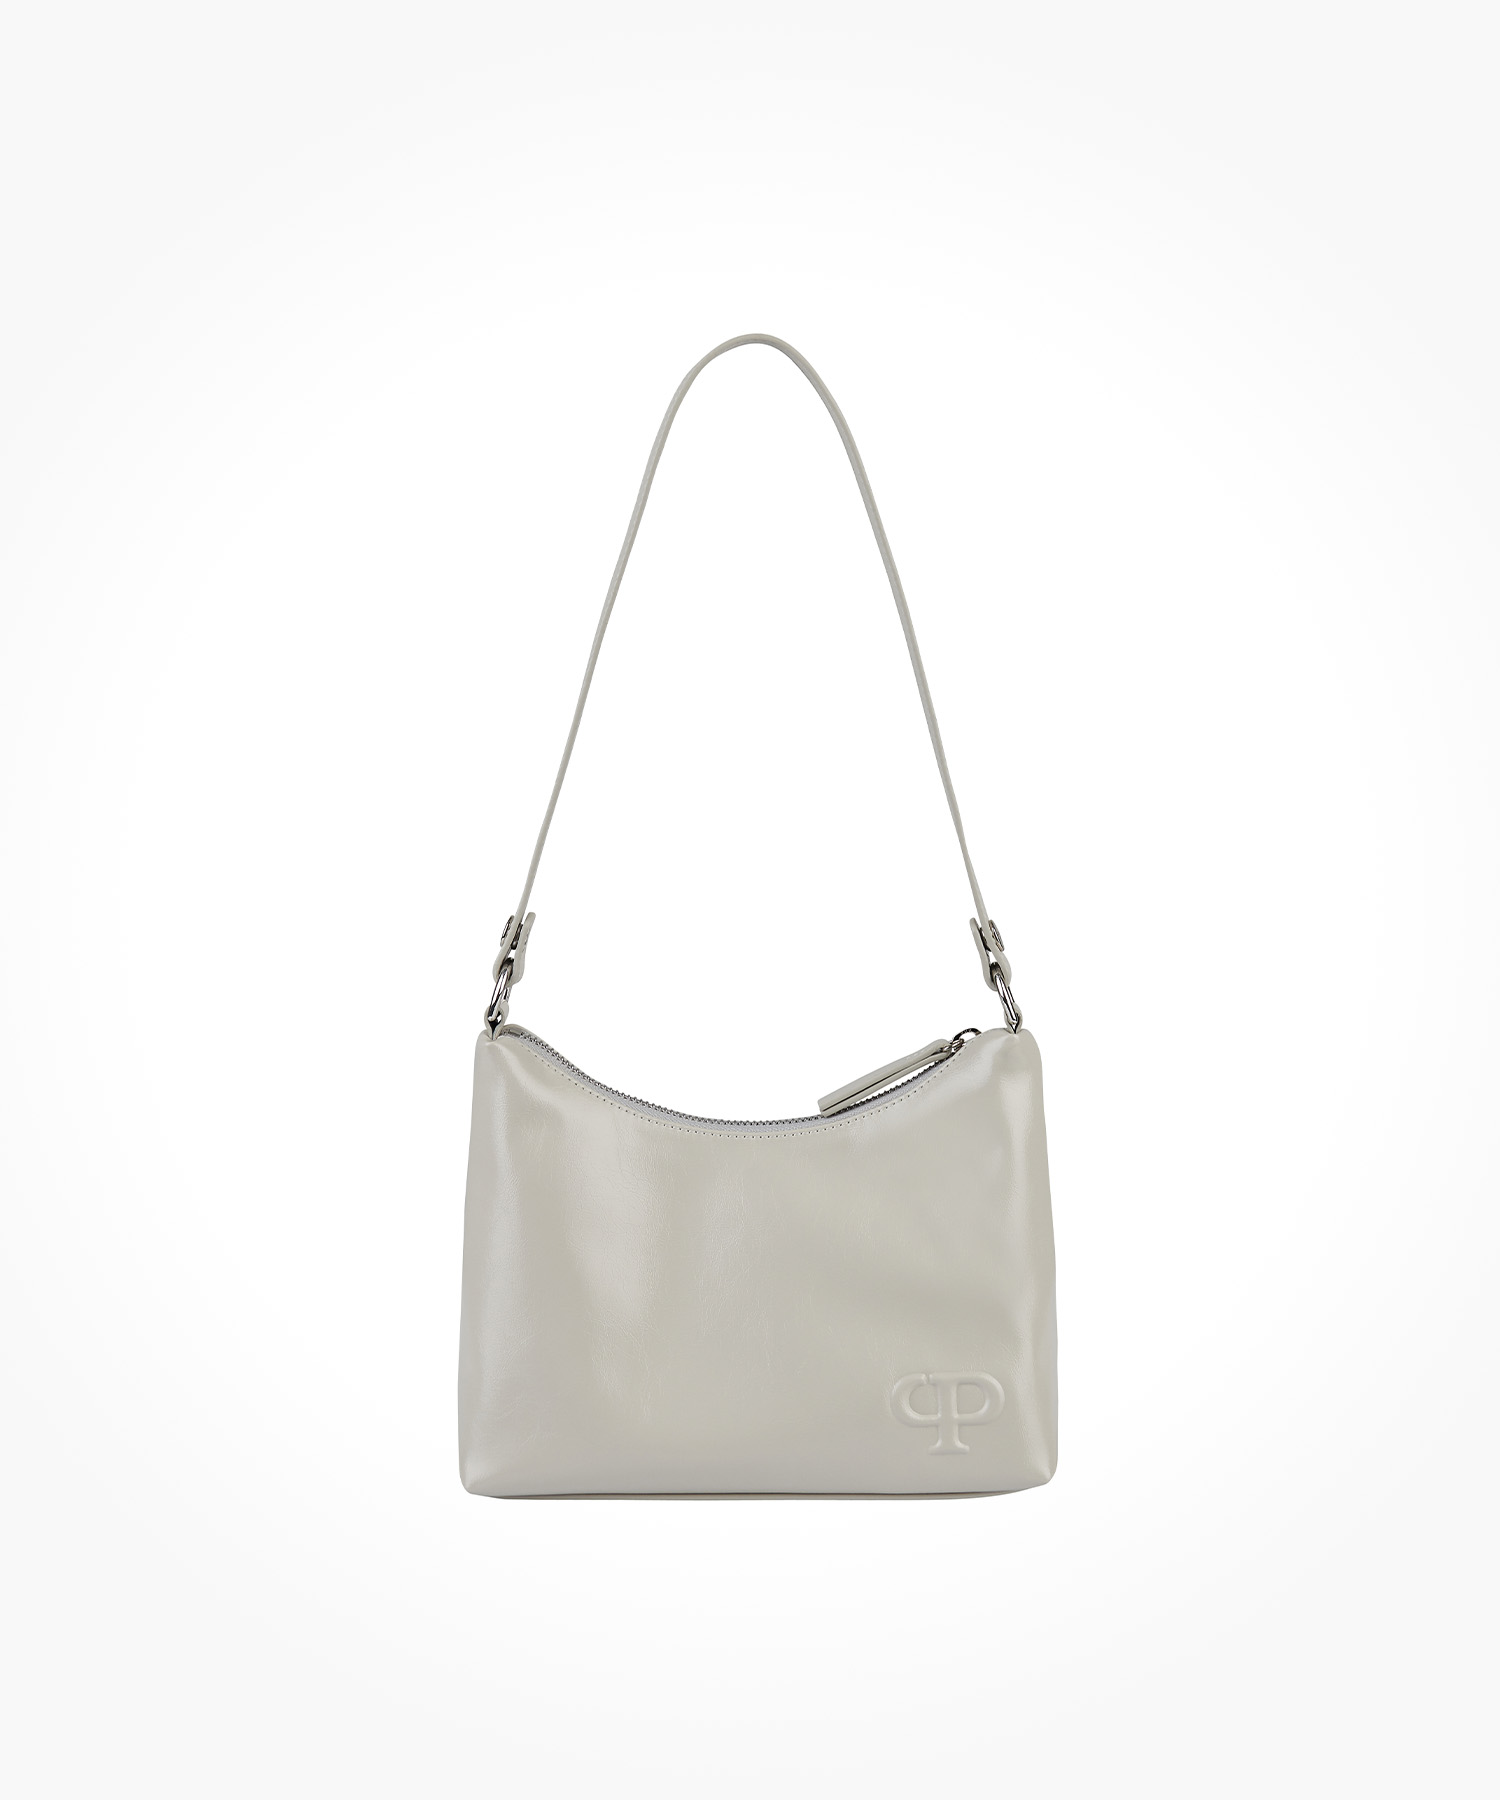 SPARKLING SQUARE HOBO BAG(CREAMY OYSTER)